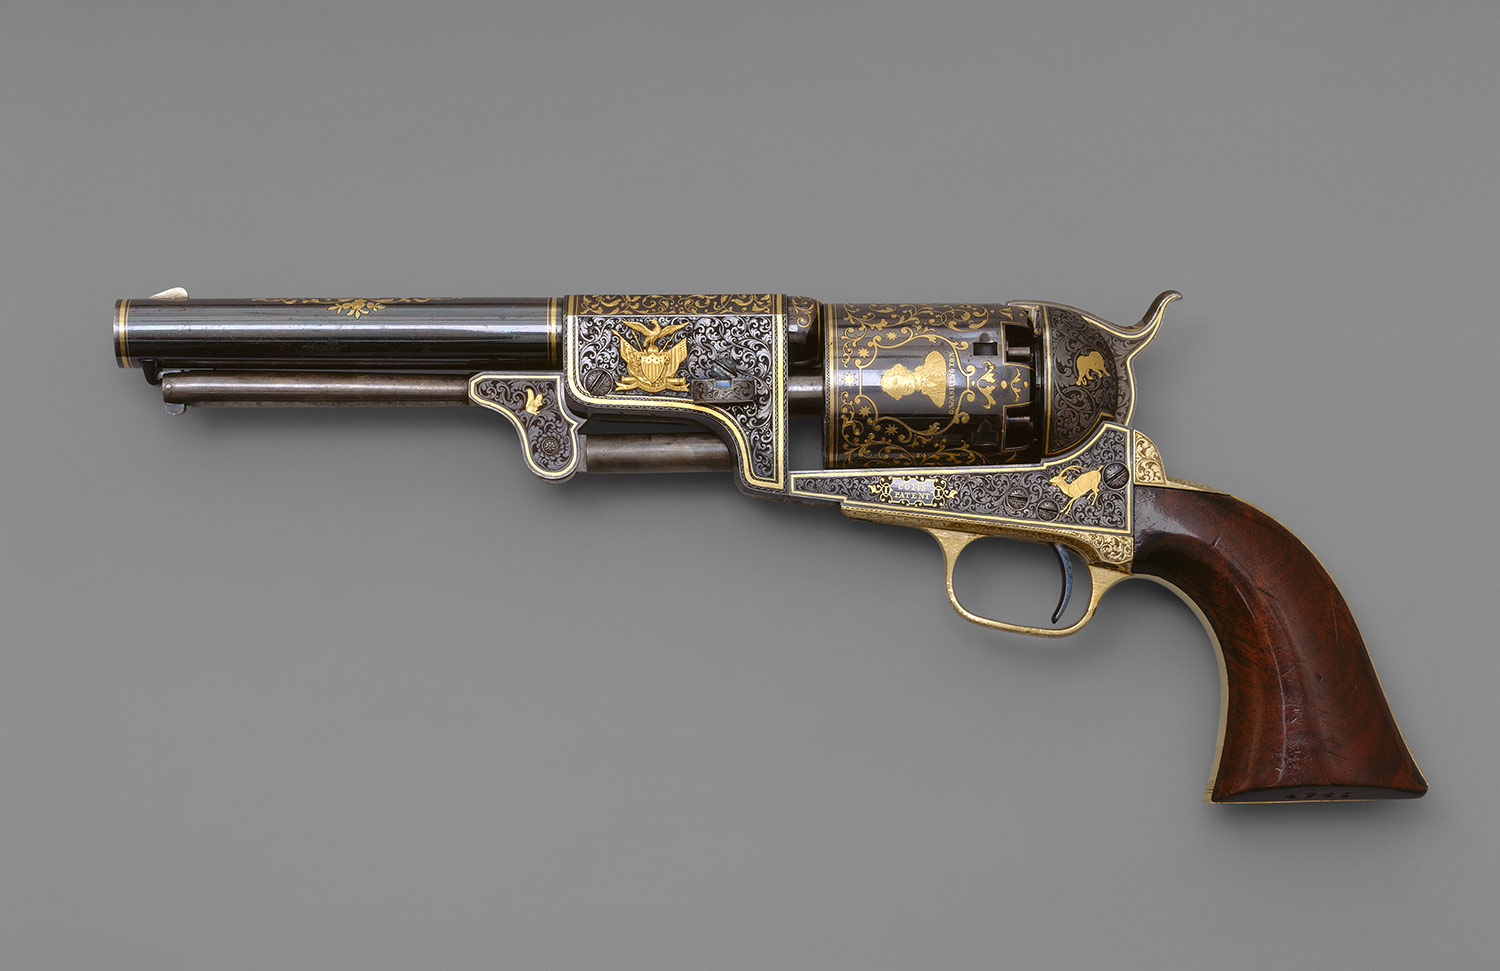 American inventor and industrialist samuel colt   history 